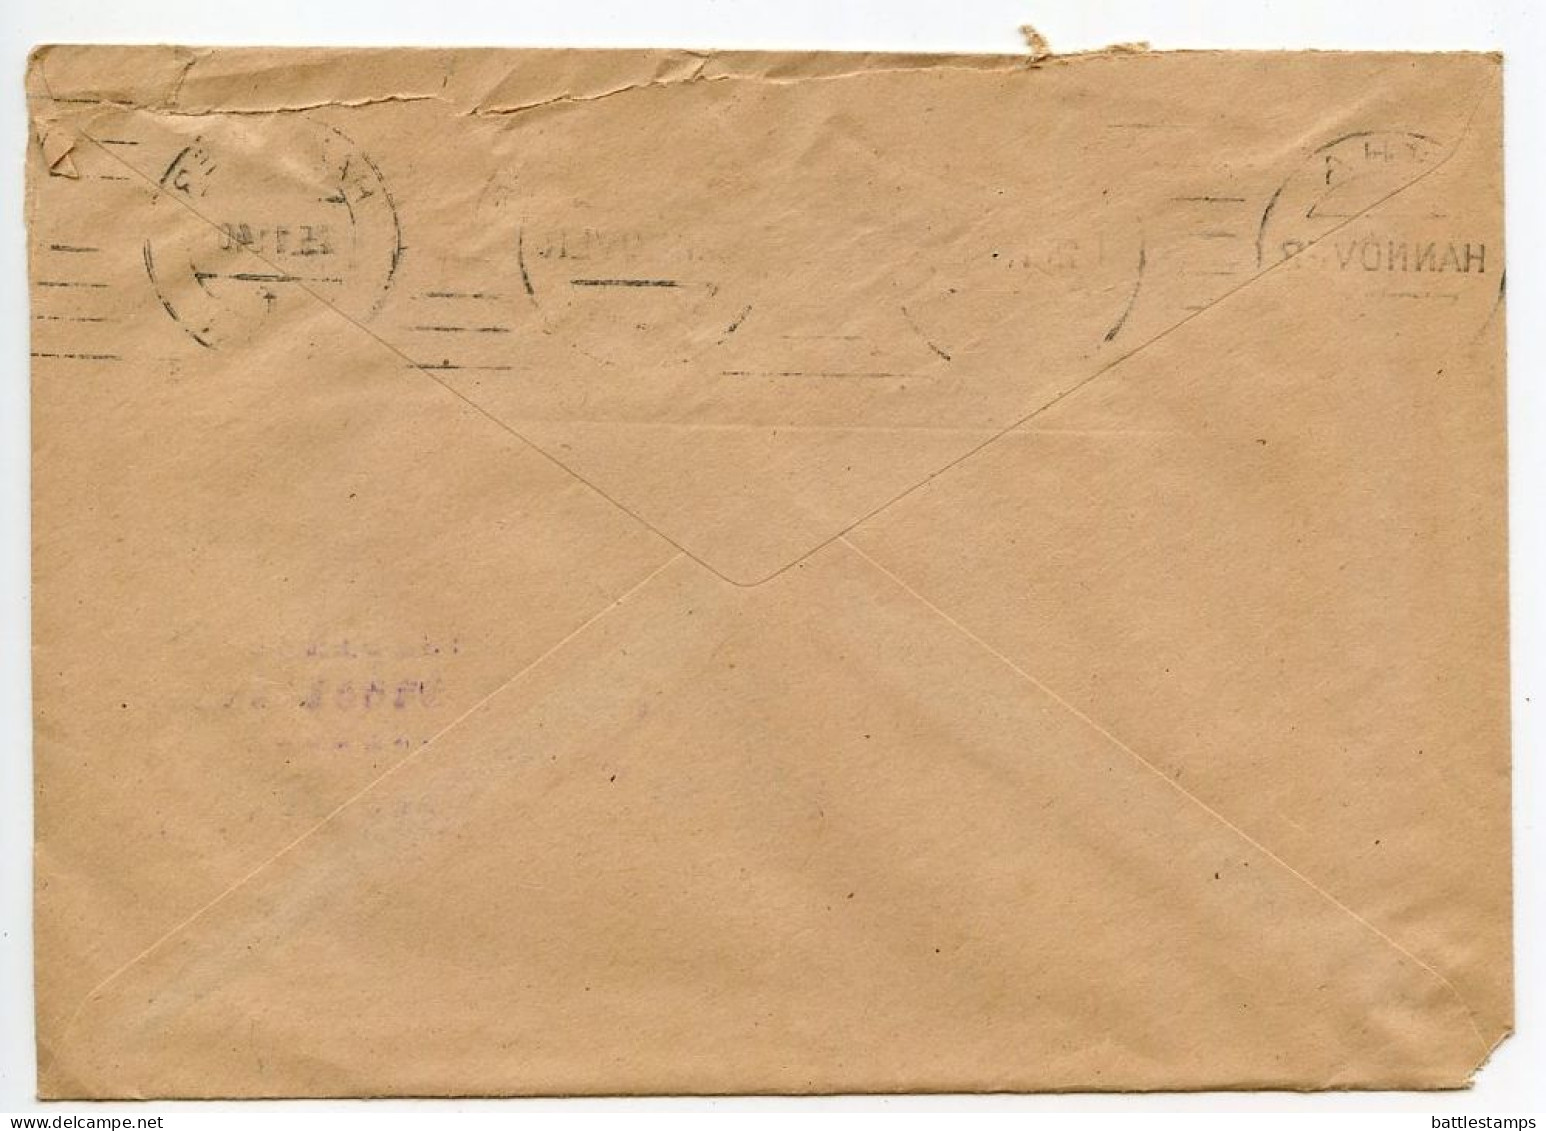 Germany 1940 Cover; Postscheckamt Hannover (Hanover Postal Check Office) With Kontoauszug (Account Statement) - Briefe U. Dokumente